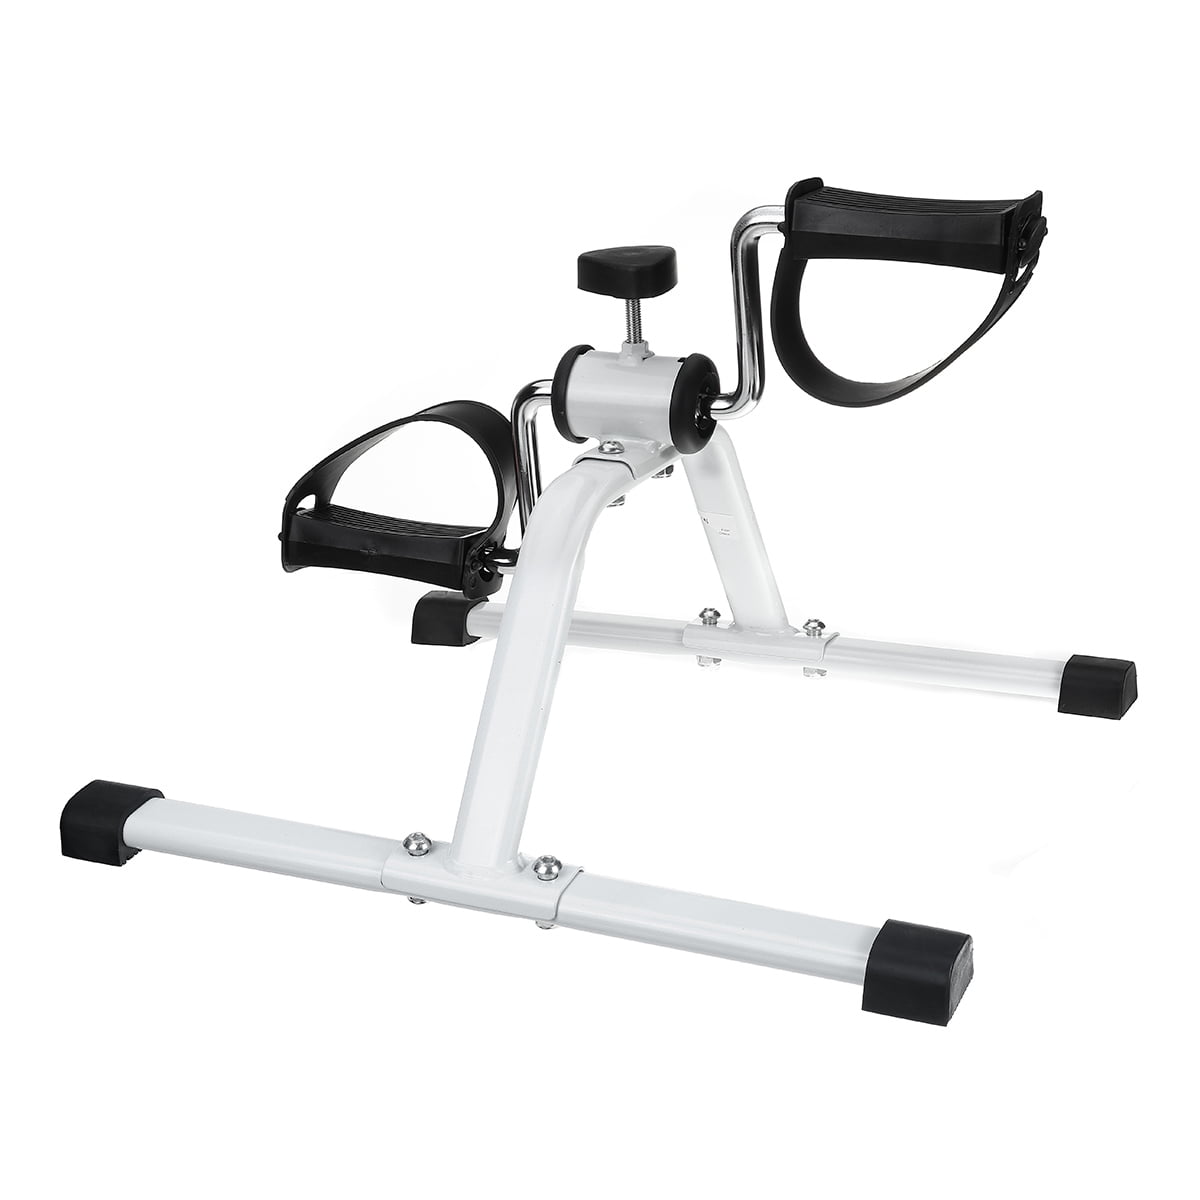 Under Desk Bike Pedal Exerciser Fitness Bicycle Exercise Bike with